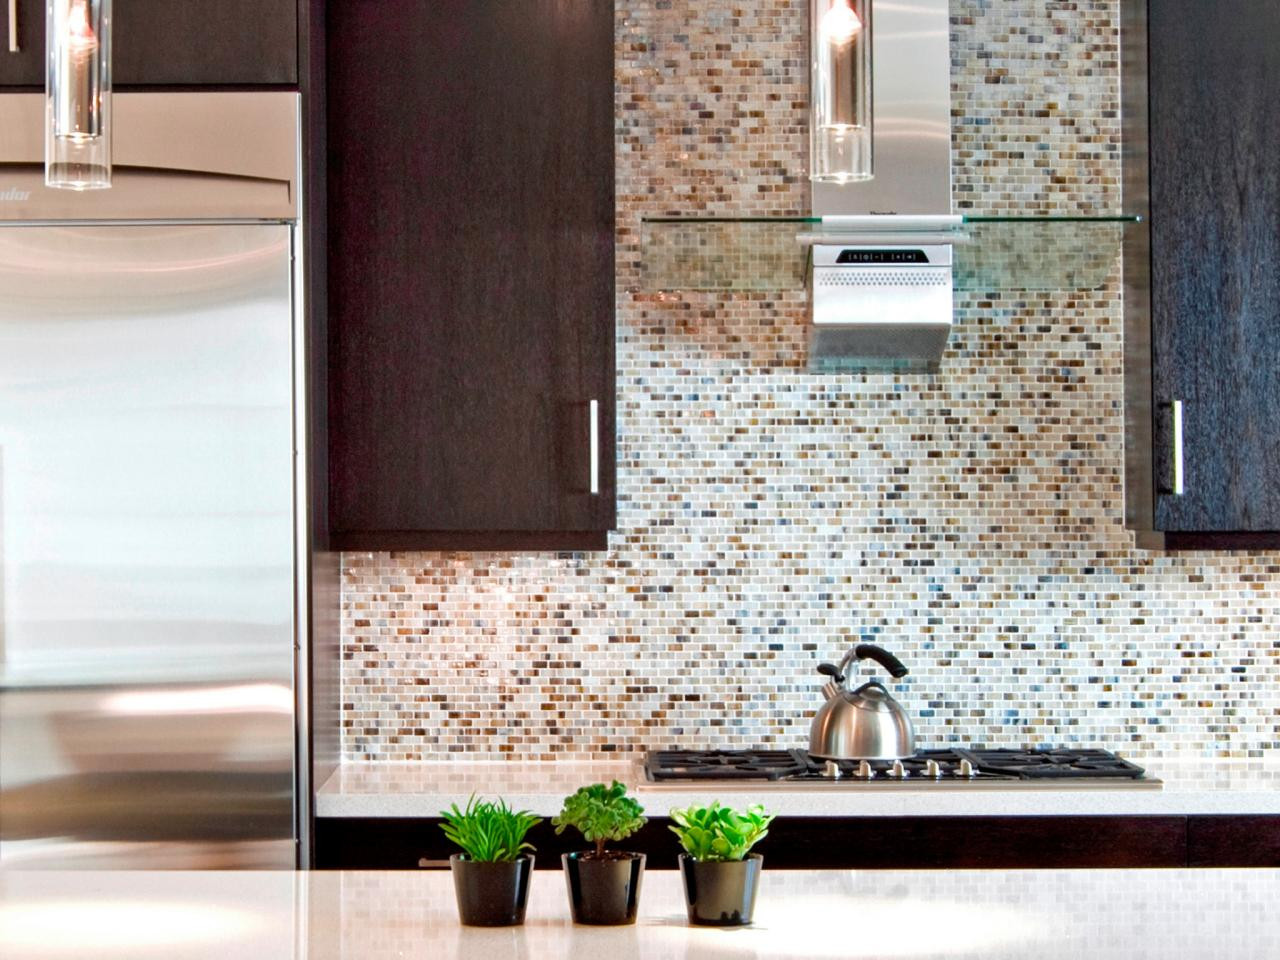 Kitchen Tiles Pictures
 Everything That You Should Know about Kitchen Backsplash